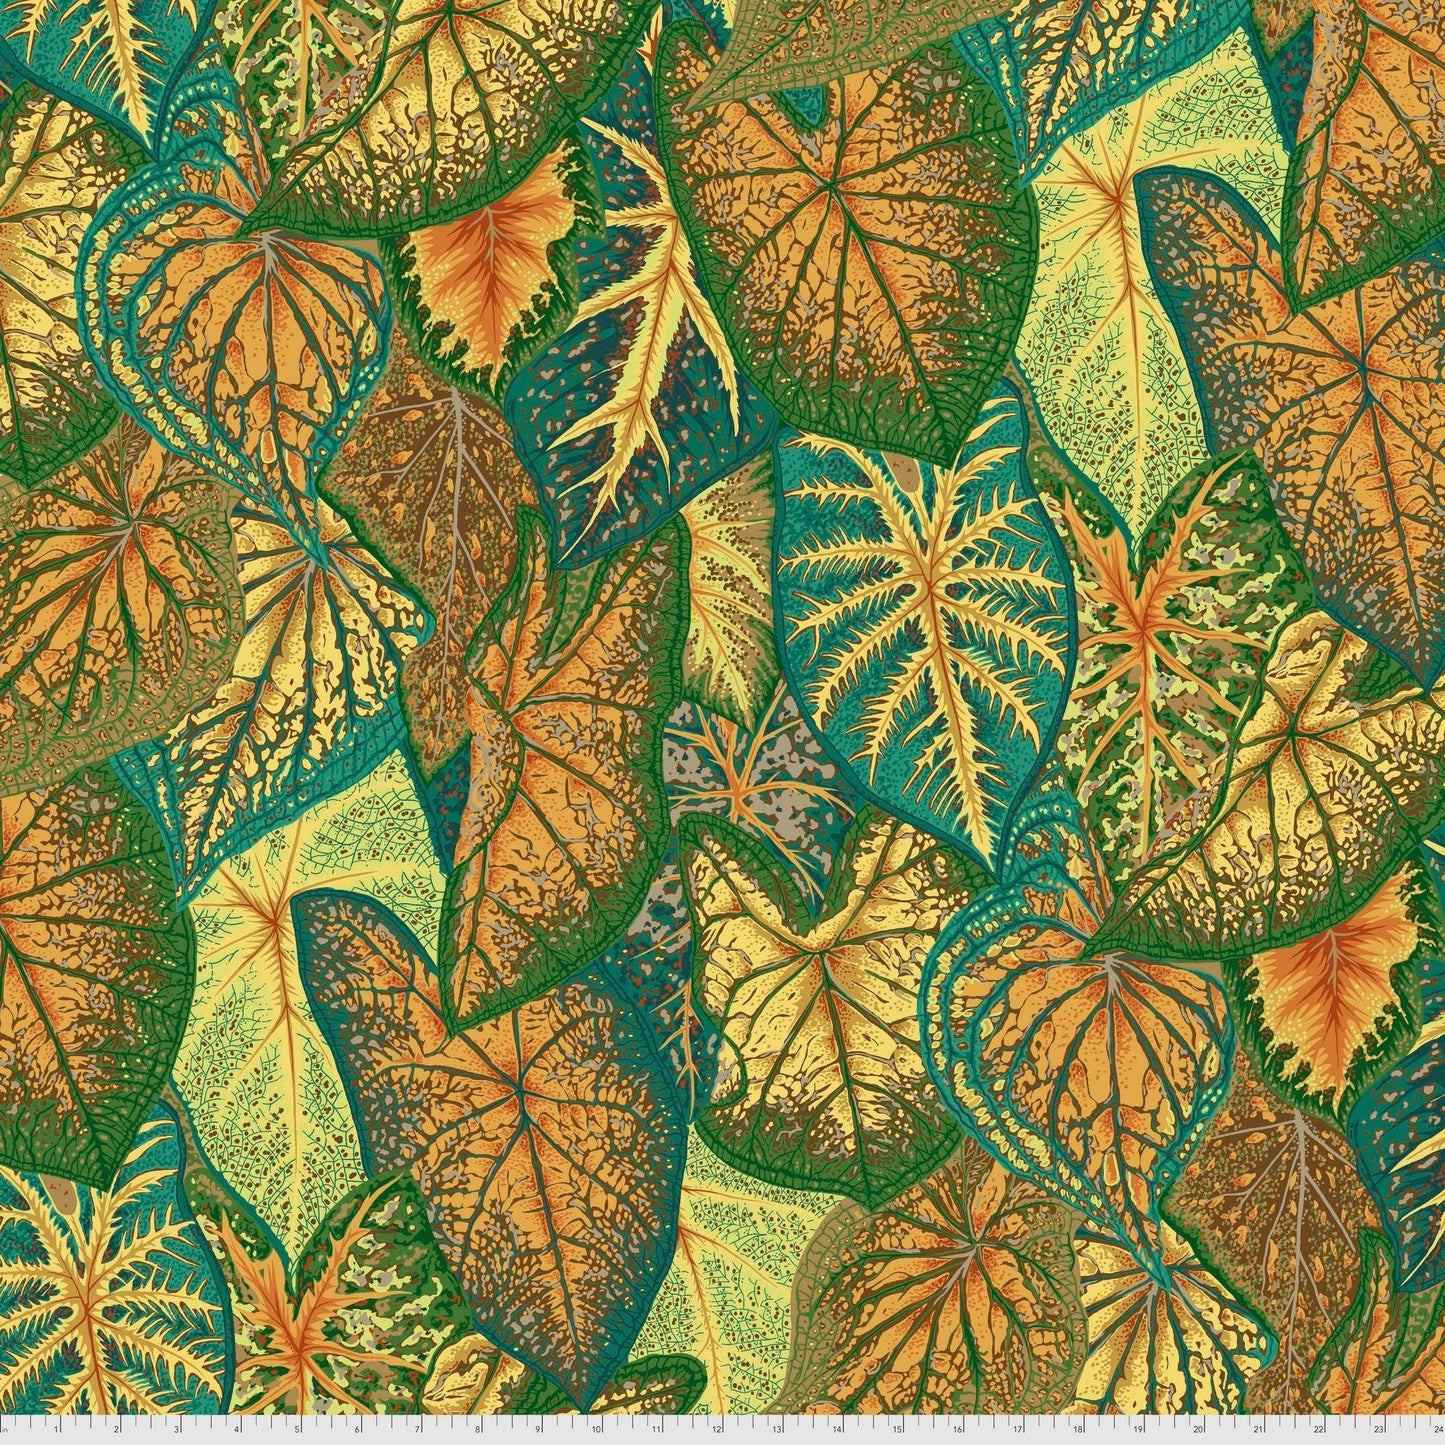 Caladiums Gold PWPJ108 Kaffe Fassett, Philip Jacobs, Quilt Fabric, Cotton Fabric, Quilting Fabric, Leaf Fabric, Woodland, Fabric By The Yard